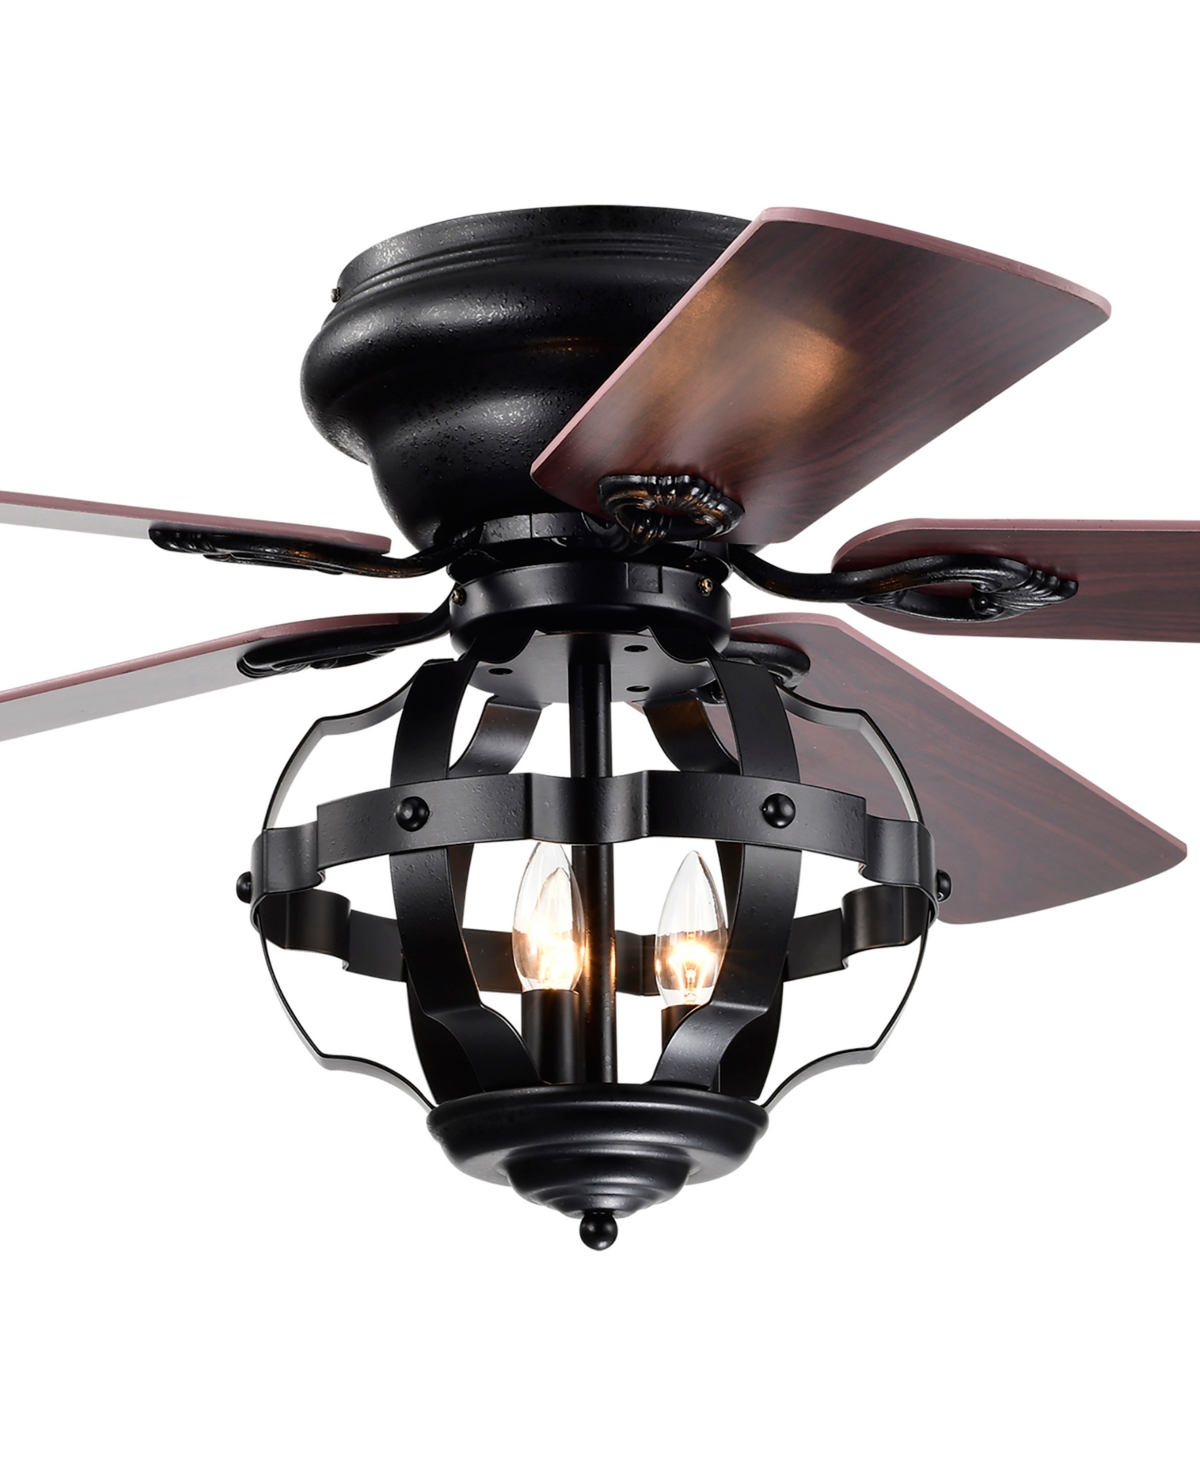 Home Accessories Haley 52" 3-light Indoor Ceiling Fan With Light Kit In Black